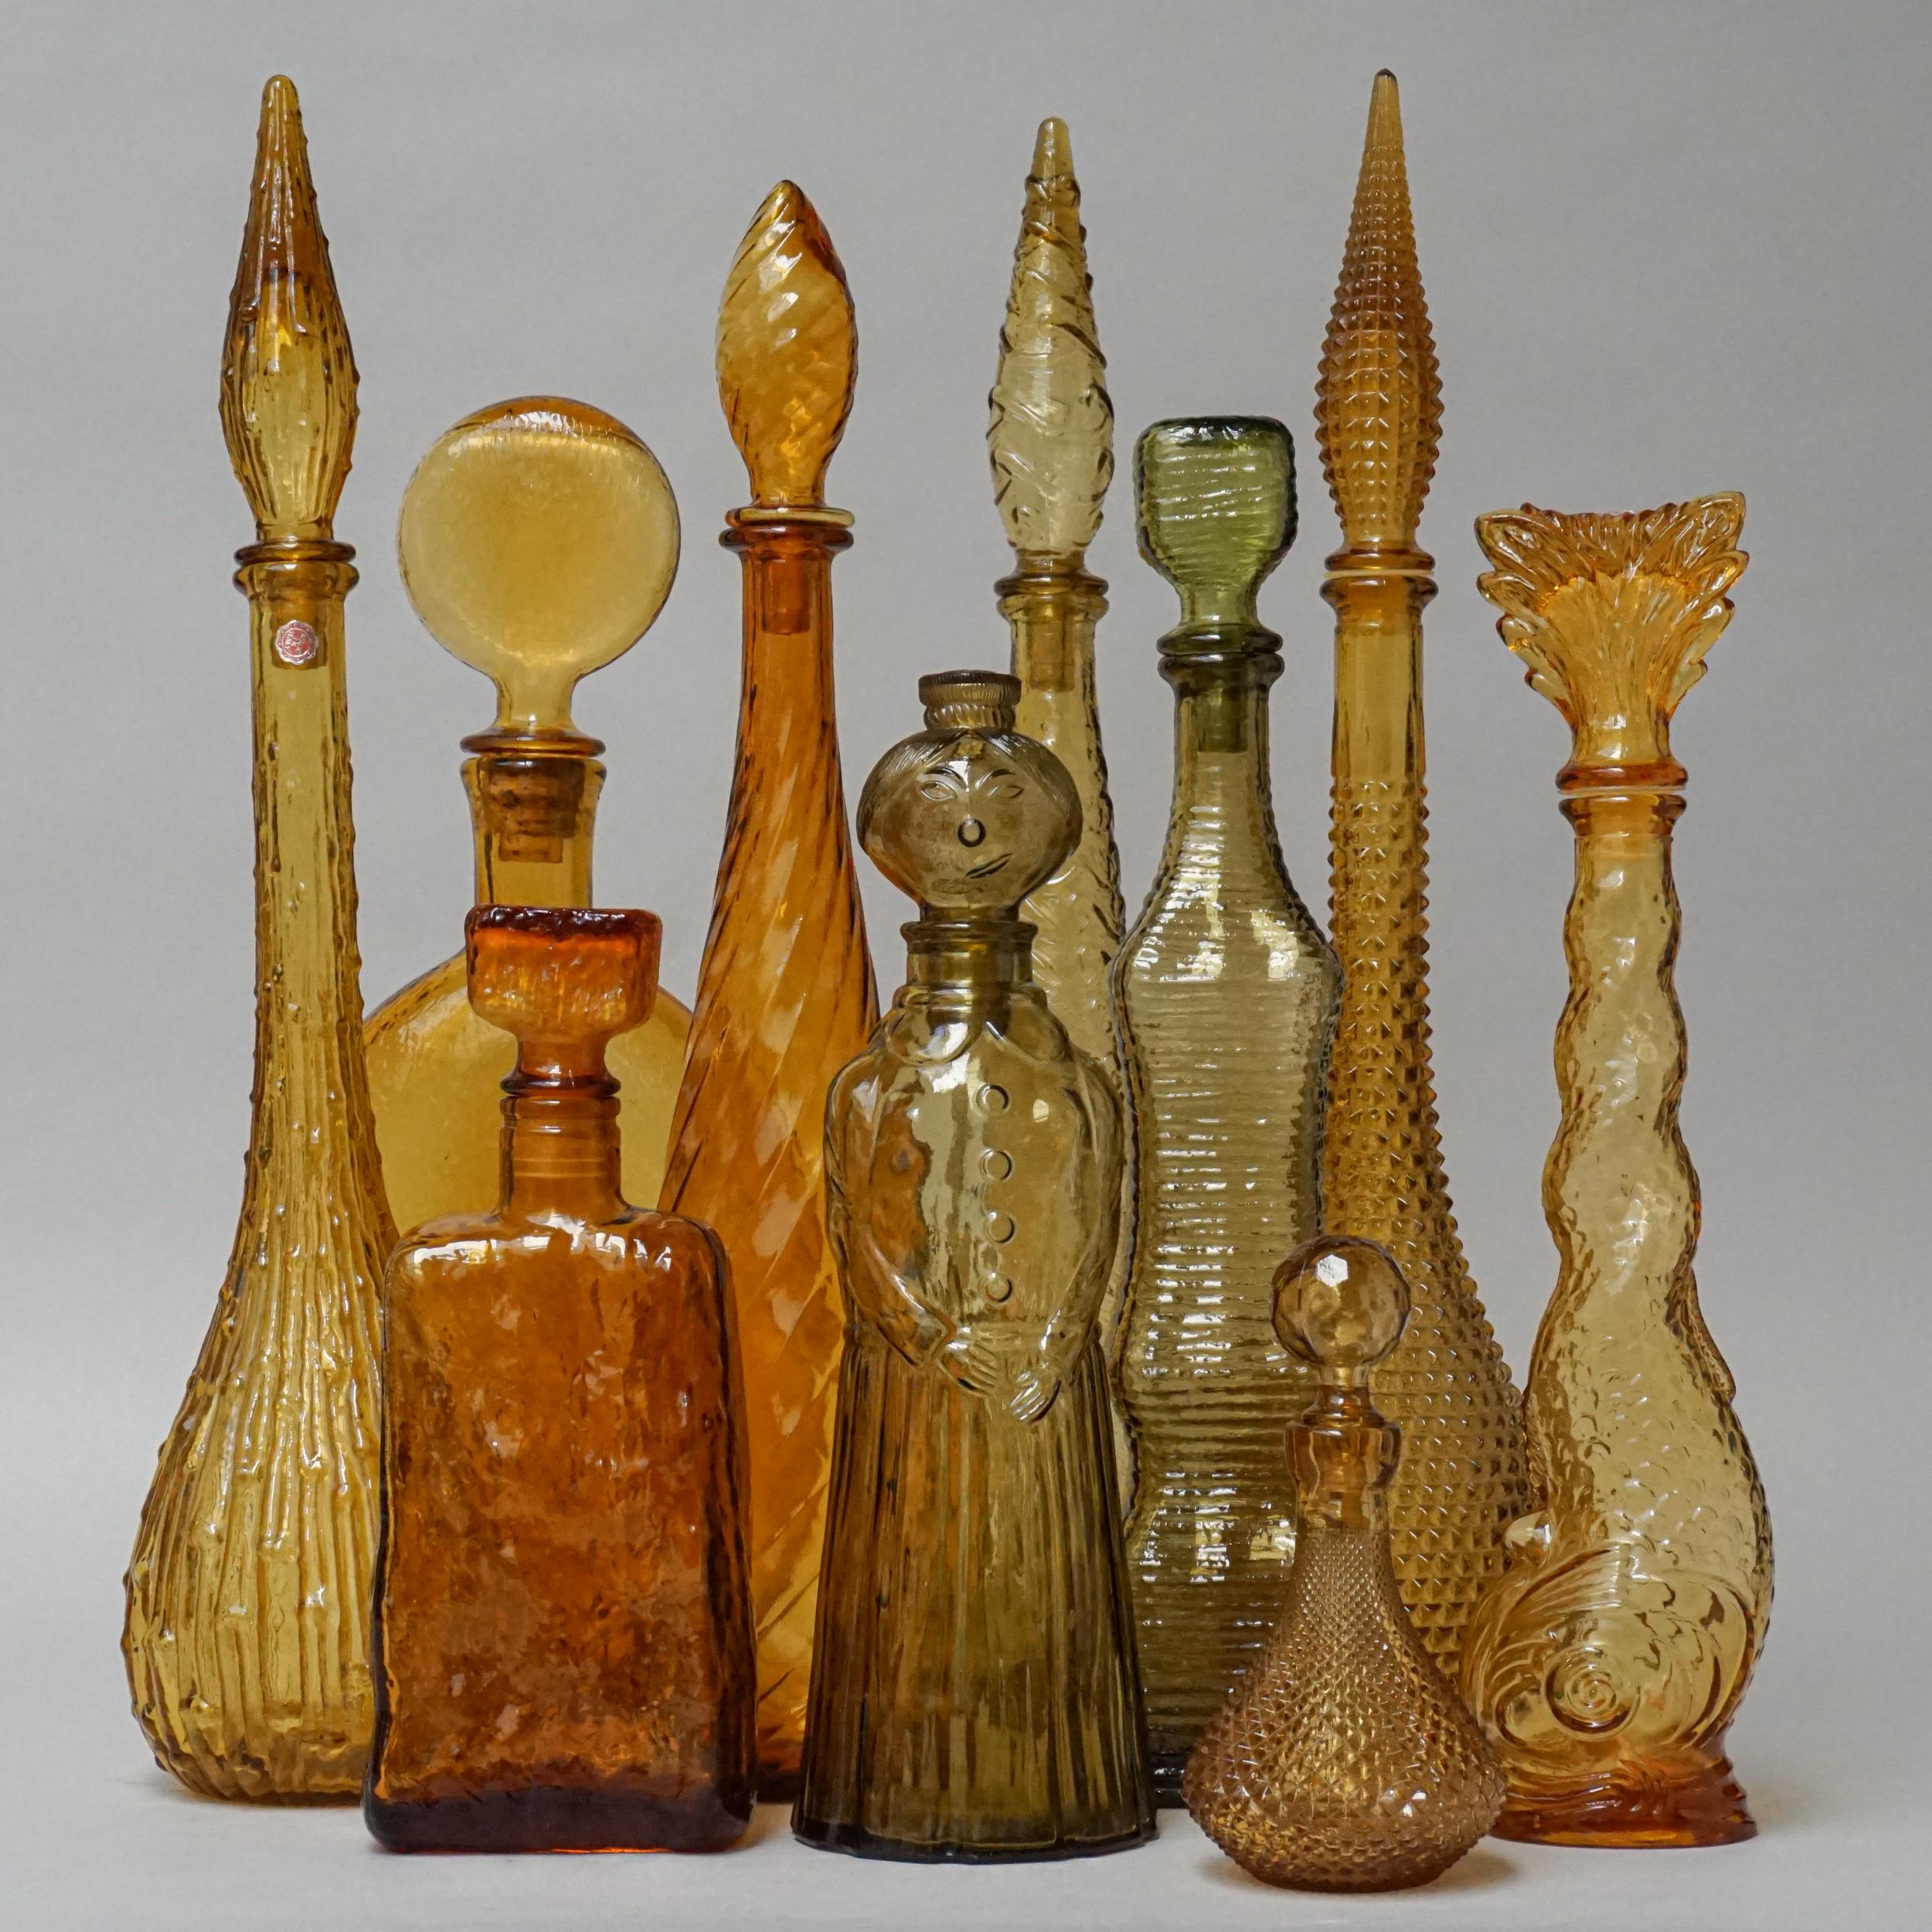 Extraordinary set of ten large vintage glass 'genie bottle' decanters with different shapes in golden amber yellow.
Look at these different shades of 'Golden' colors and all these pretty shapes.
They used to be filled with different kinds of